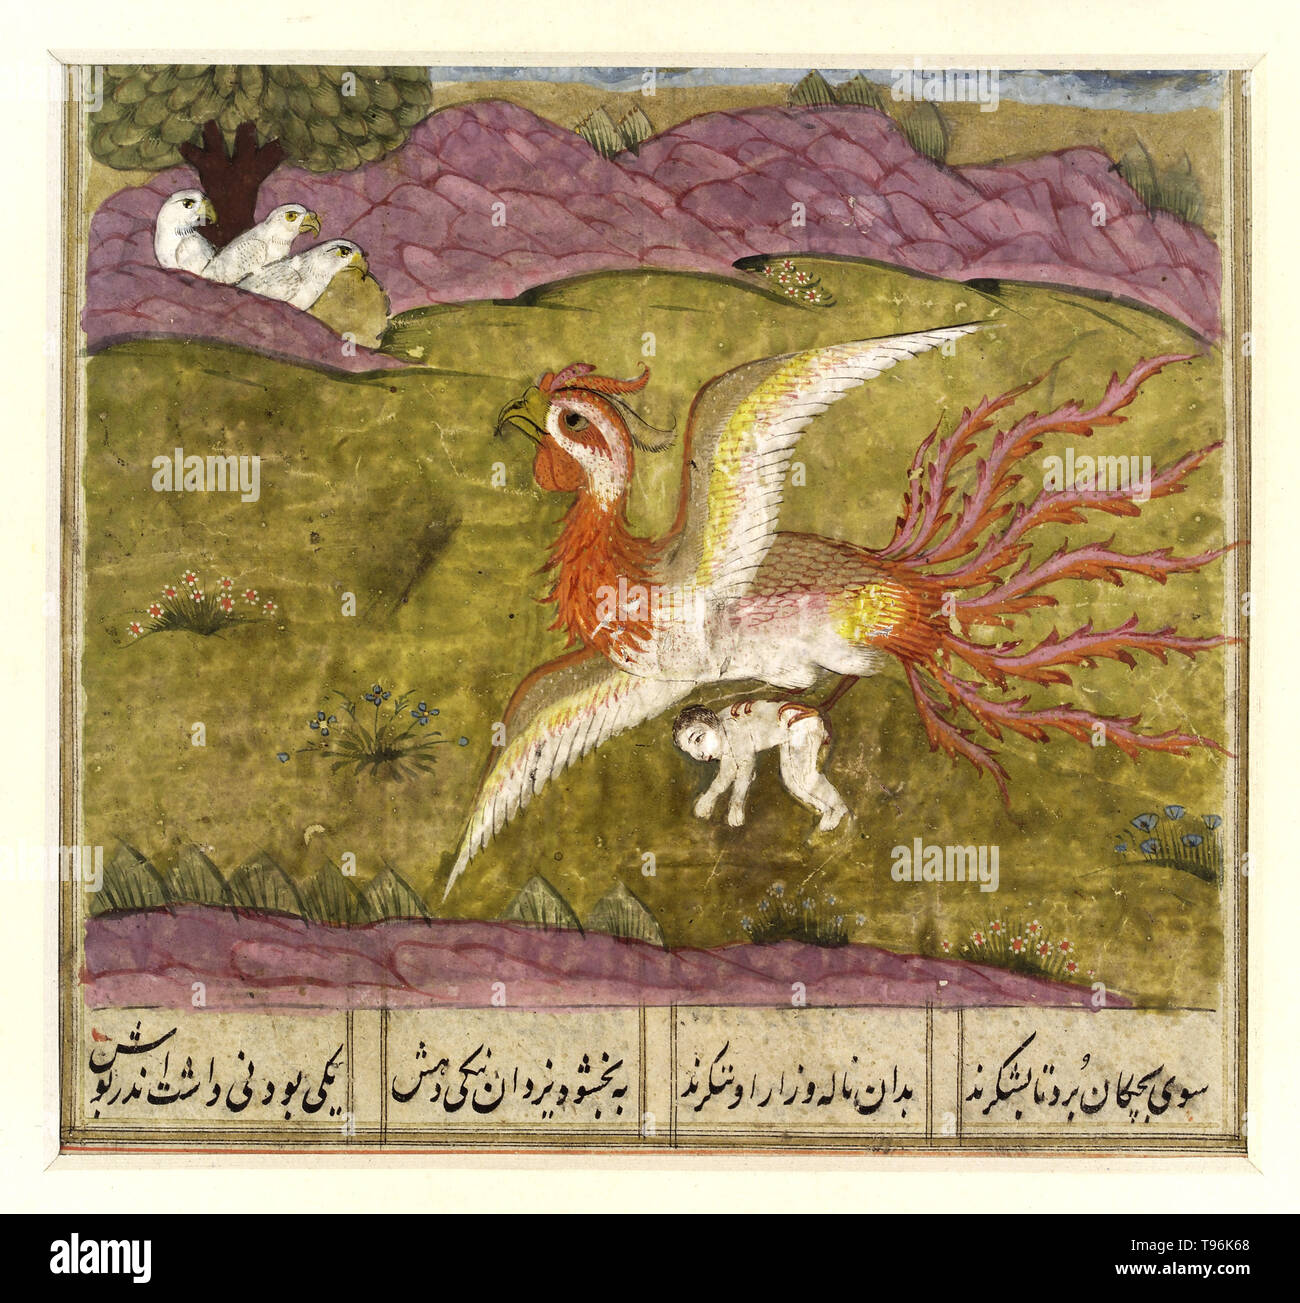 The Simurgh, a benevolent Persian mythological creature, carrying Zal to her nest. From Shah Namah (or Shahnameh), the Book of Kings, a 10th century epic by Persian poet Abu ?l-Qasim Firdowsi Tusi (c. 940–1020), or Ferdowsi (also transliterated as Firdawsi, Firdusi, Firdosi, Firdausi). It is the world's longest epic poem created by a single poet, and the national epic of Greater Iran. Stock Photo